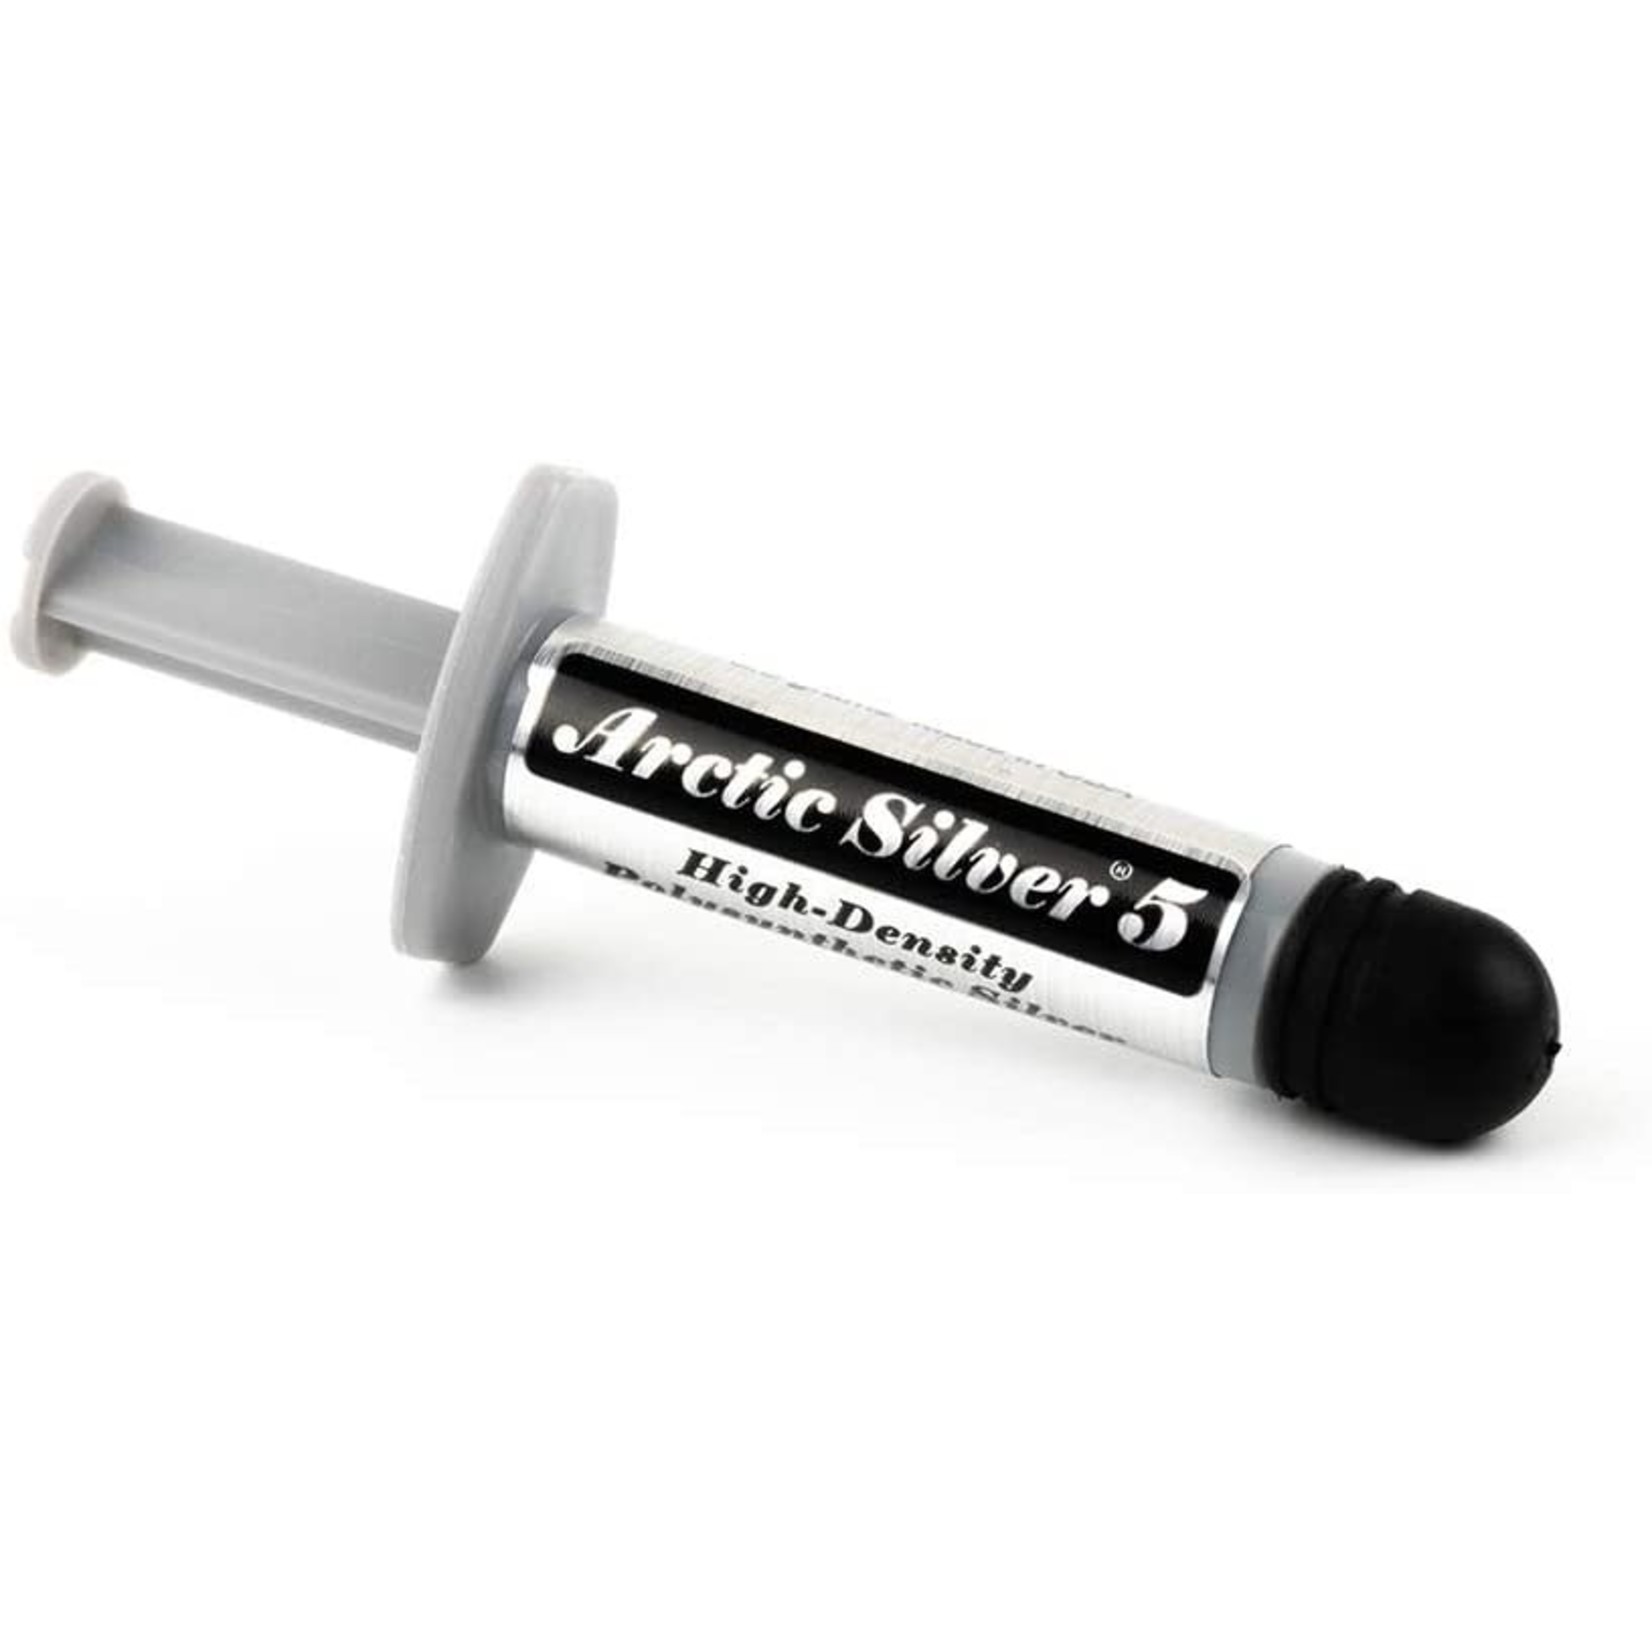 Arctic Silver Arctic Silver 5 Thermal Compound